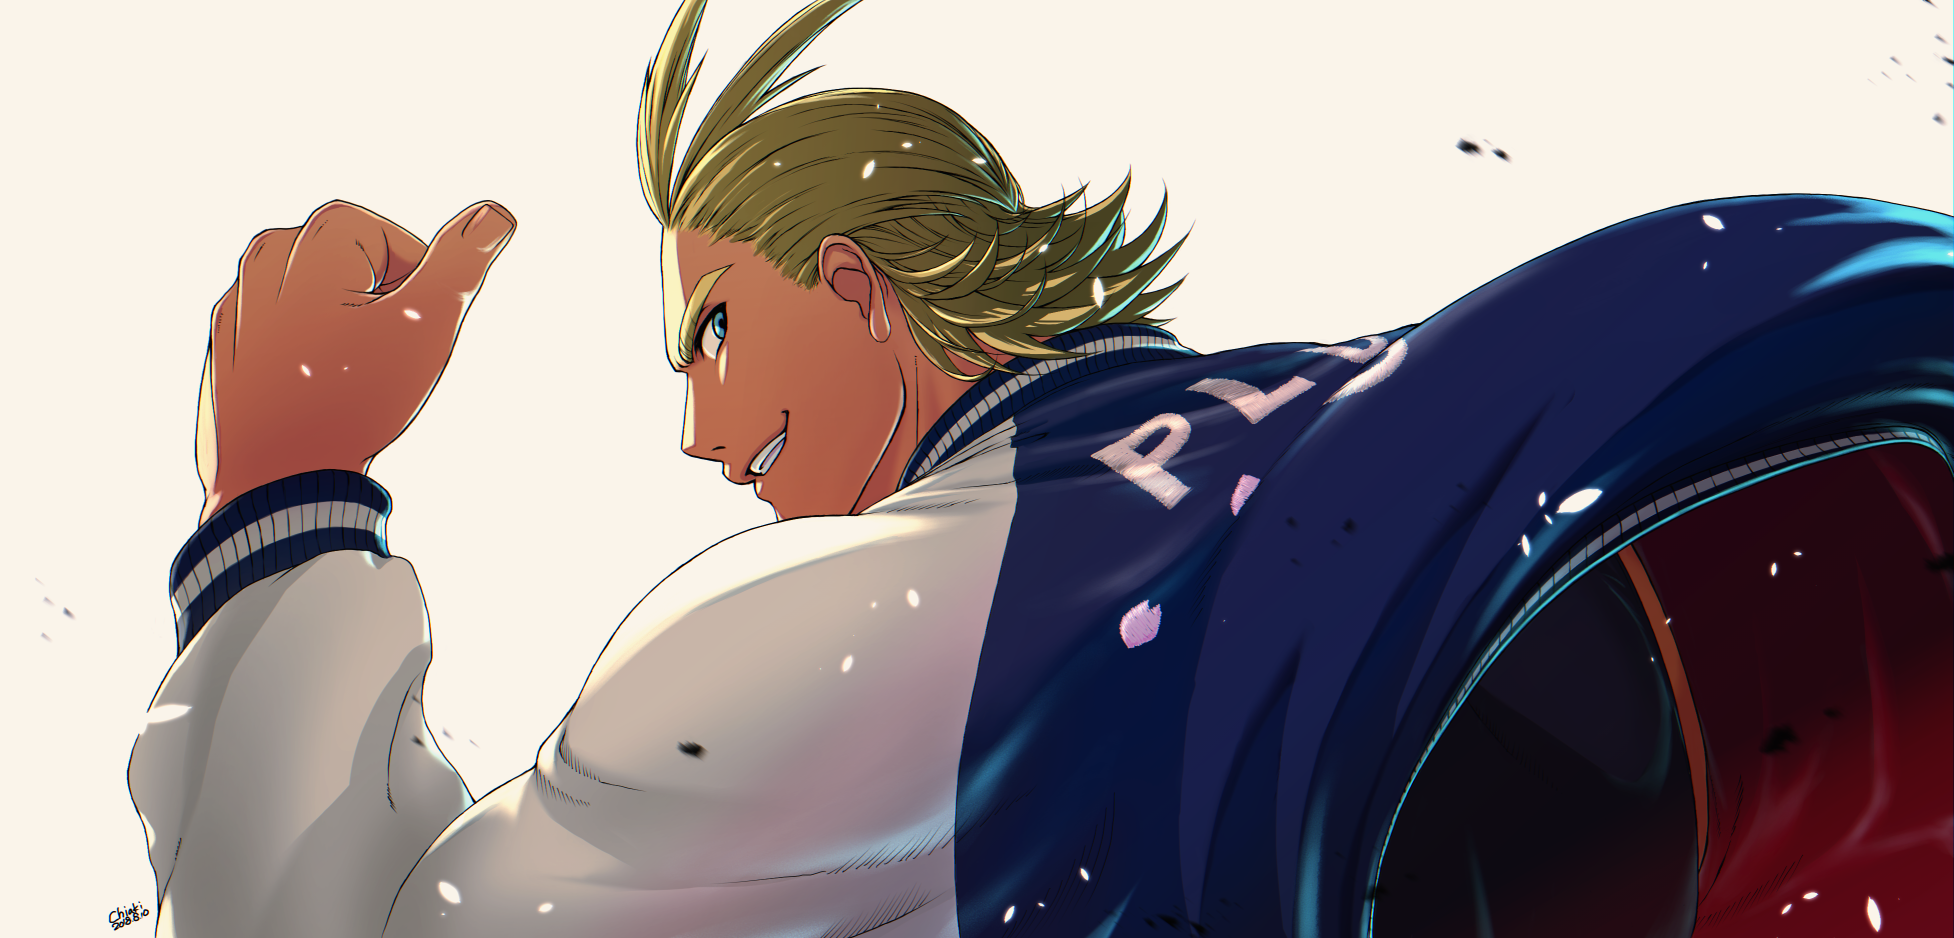 Youthful allmight